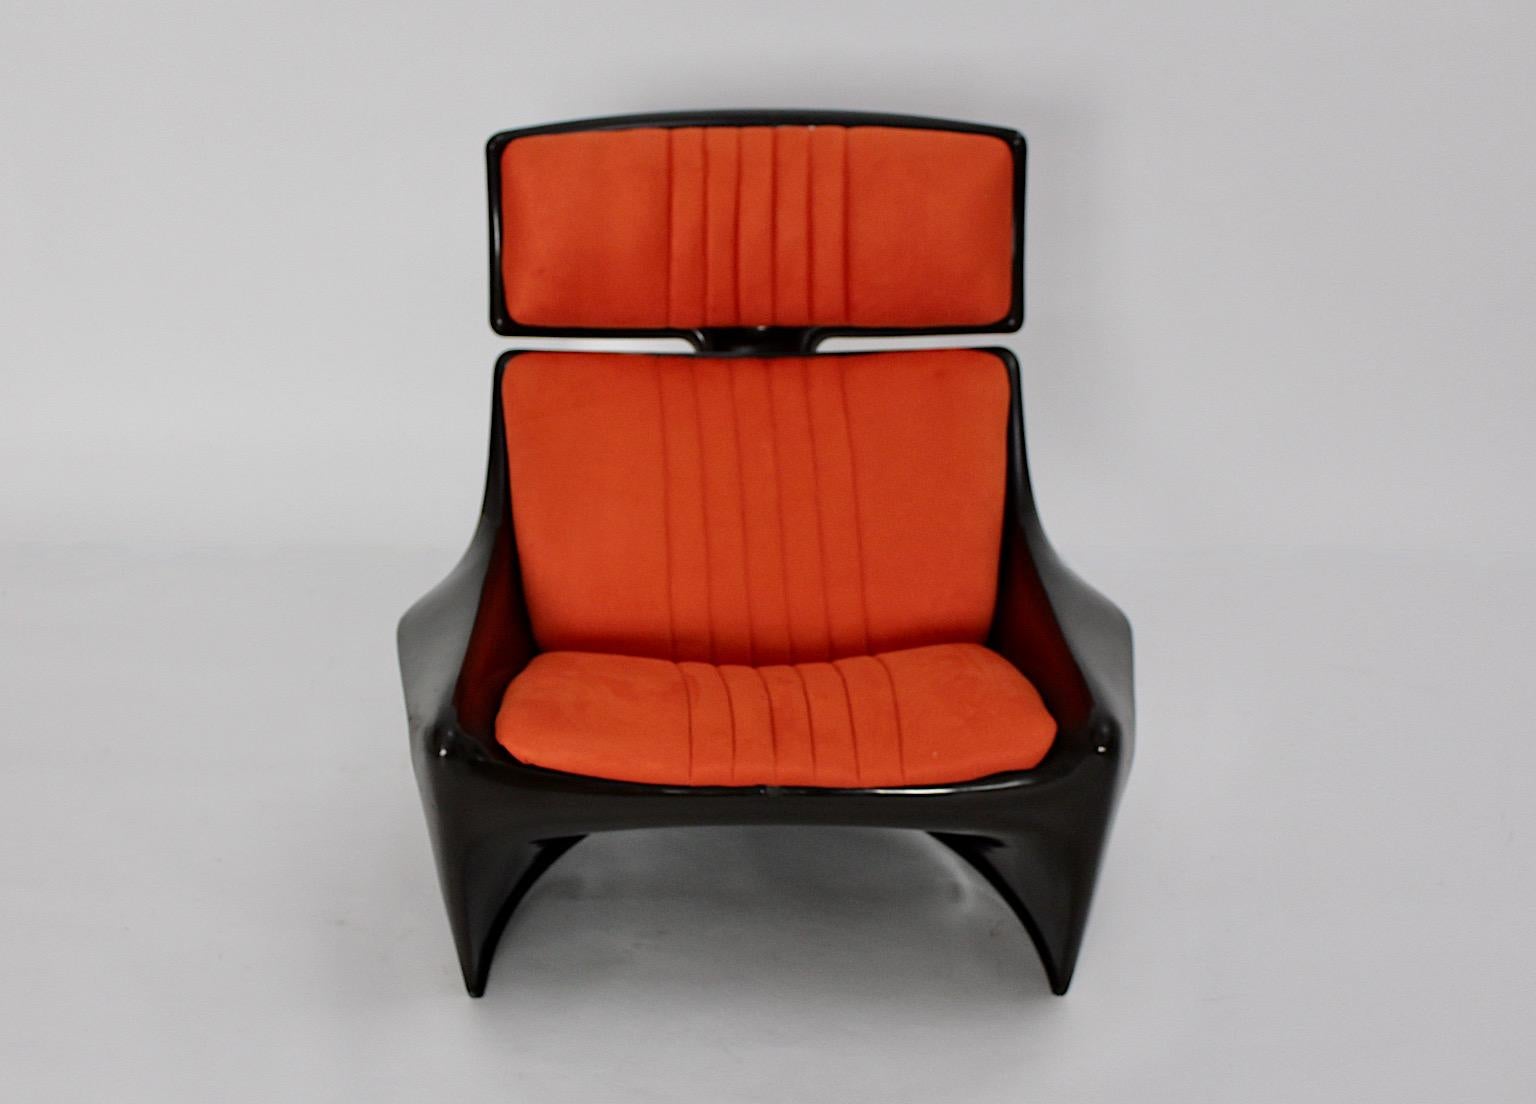 Space Age Vintage Brown Orange Plastic Lounge Chair Steen Ostergaard 1960s For Sale 4